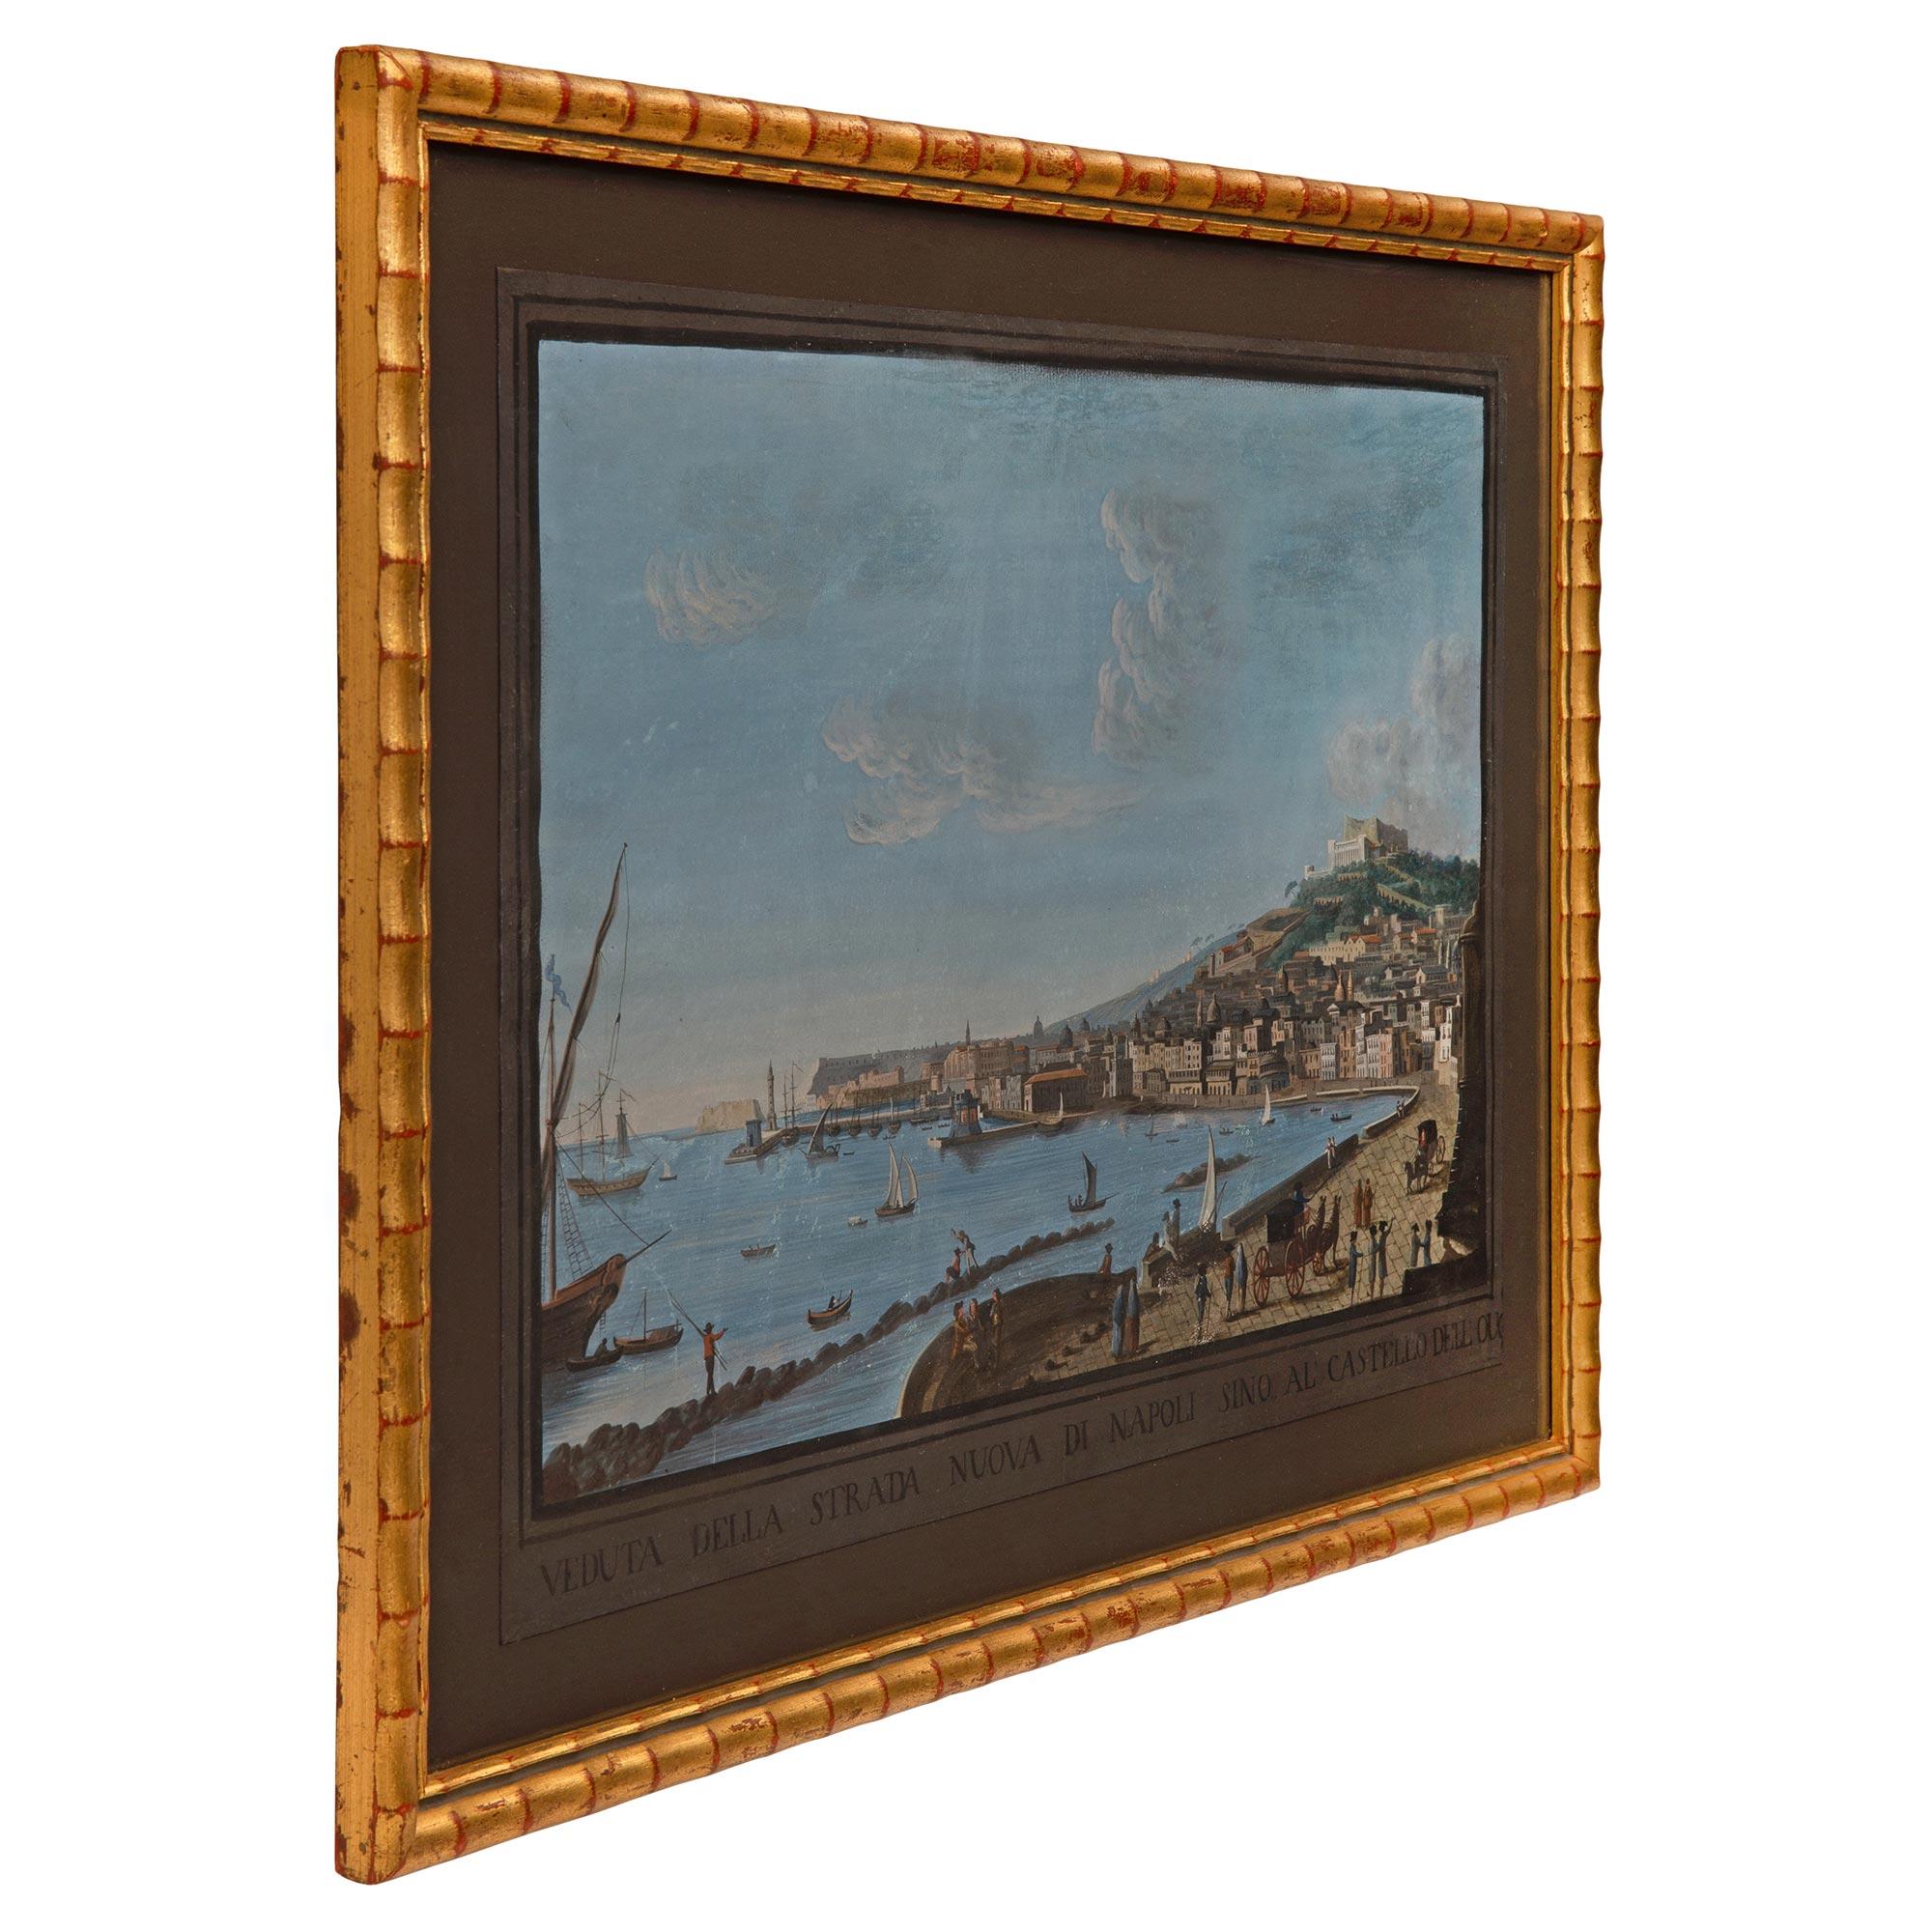 A beautiful Italian 19th century gouache of Naples, Italy. The wonderfully executed gouache depicts the port and bay of the charming fishing town of Naples with finely detailed boats, personages, horse and carriages with the town in the background